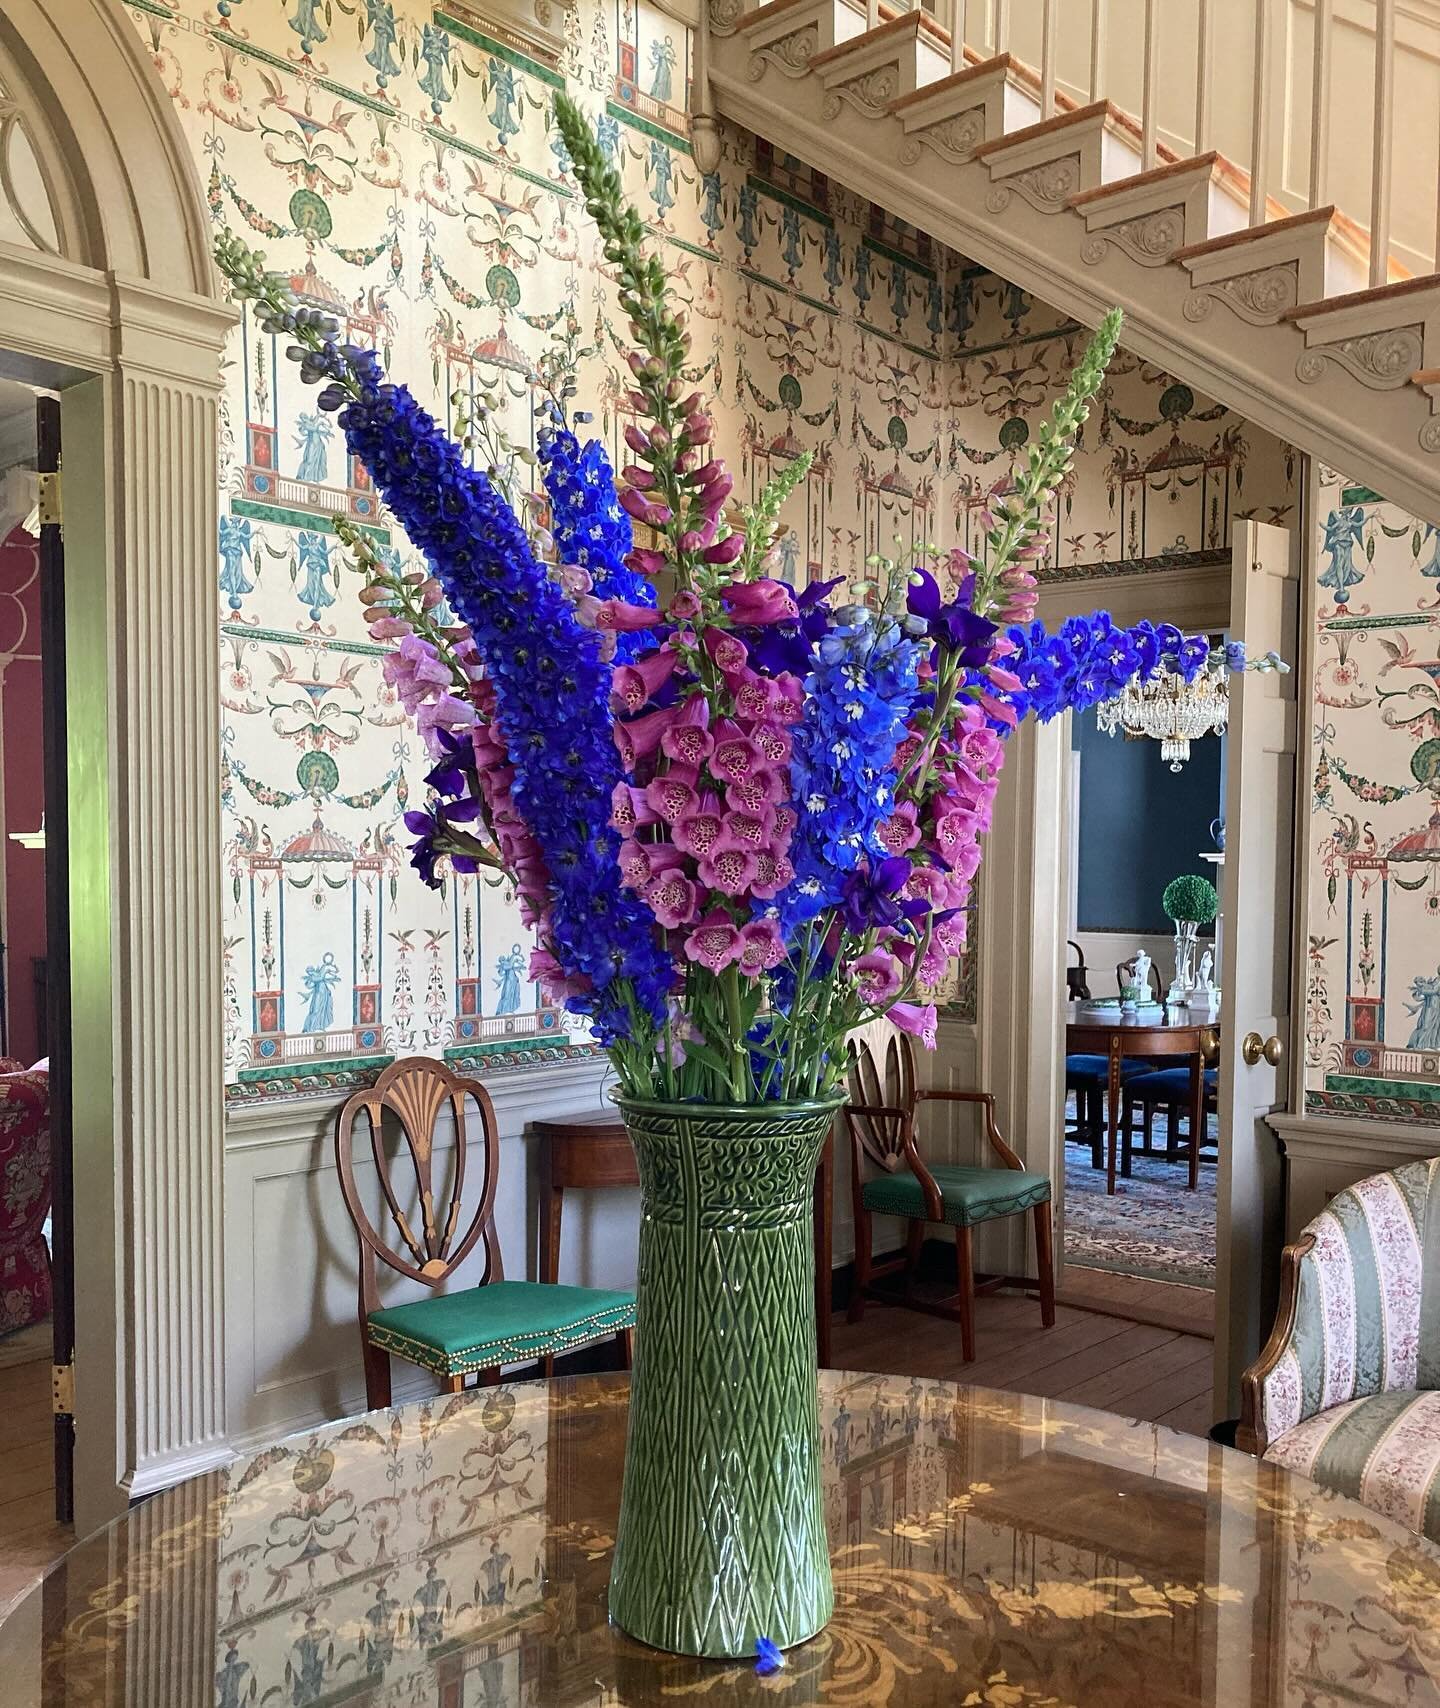 Welcome to Strawberry Hill where delphiniums, foxglove and Siberian iris are blooming in the garden.